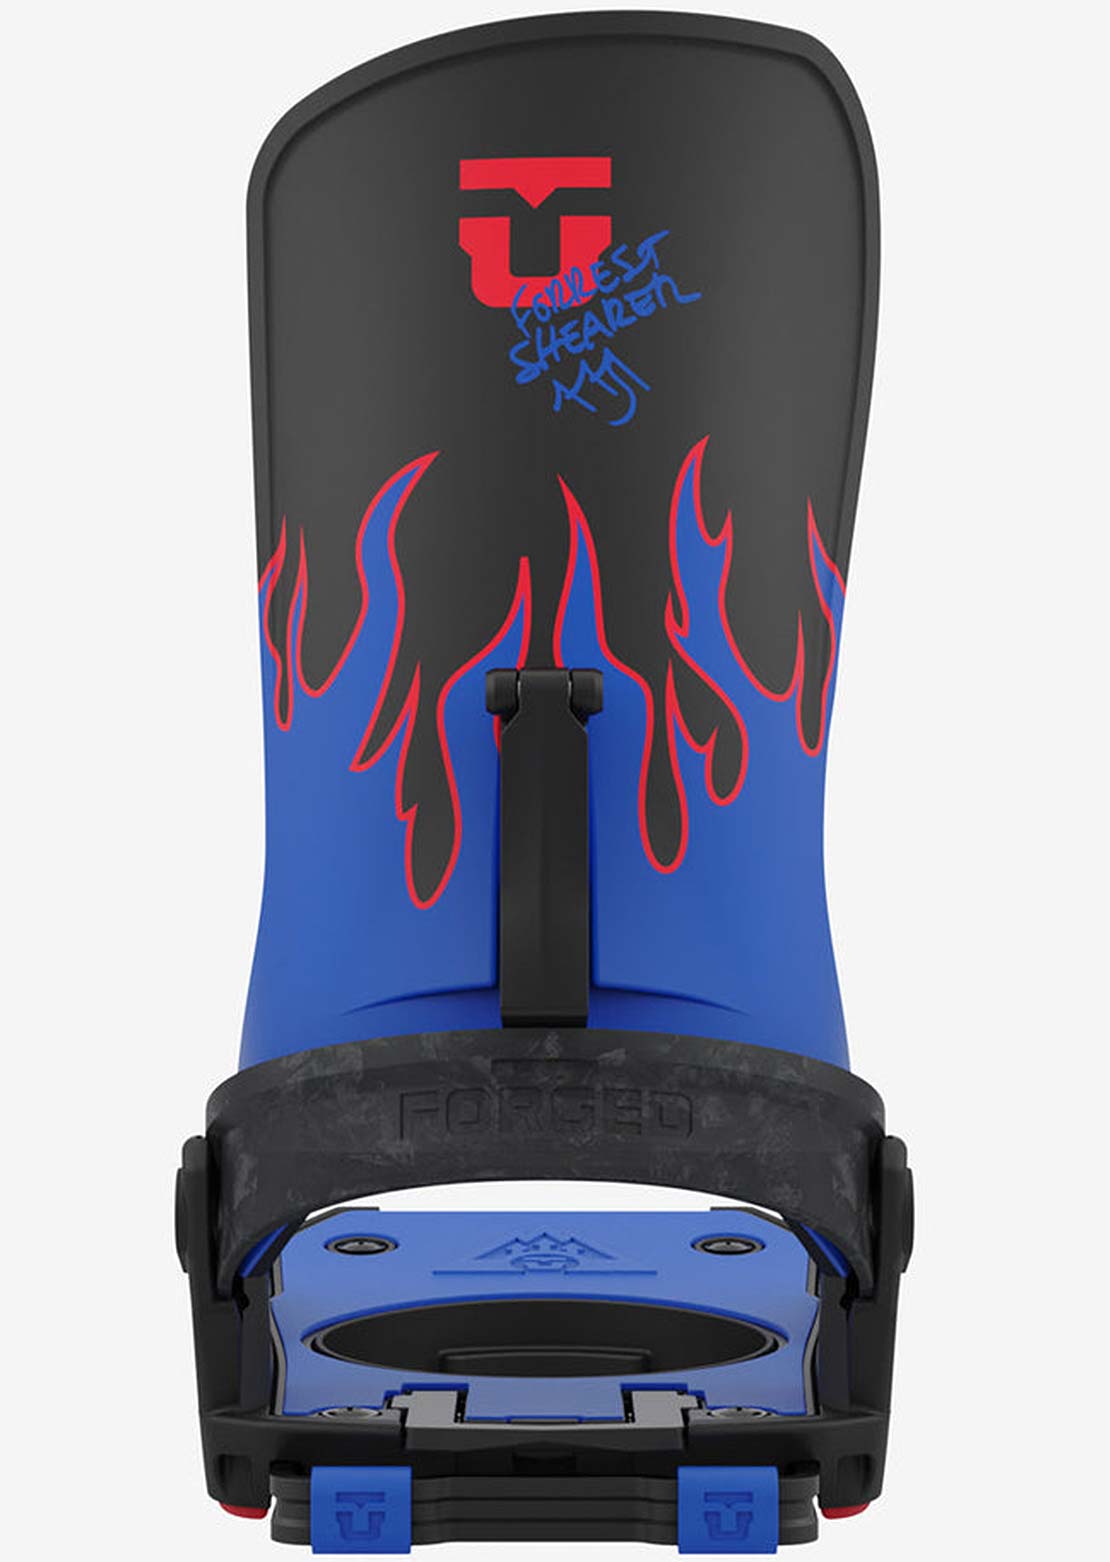 Union Forrest Shearer Charger Pro Snowboard Bindings Blue Flame